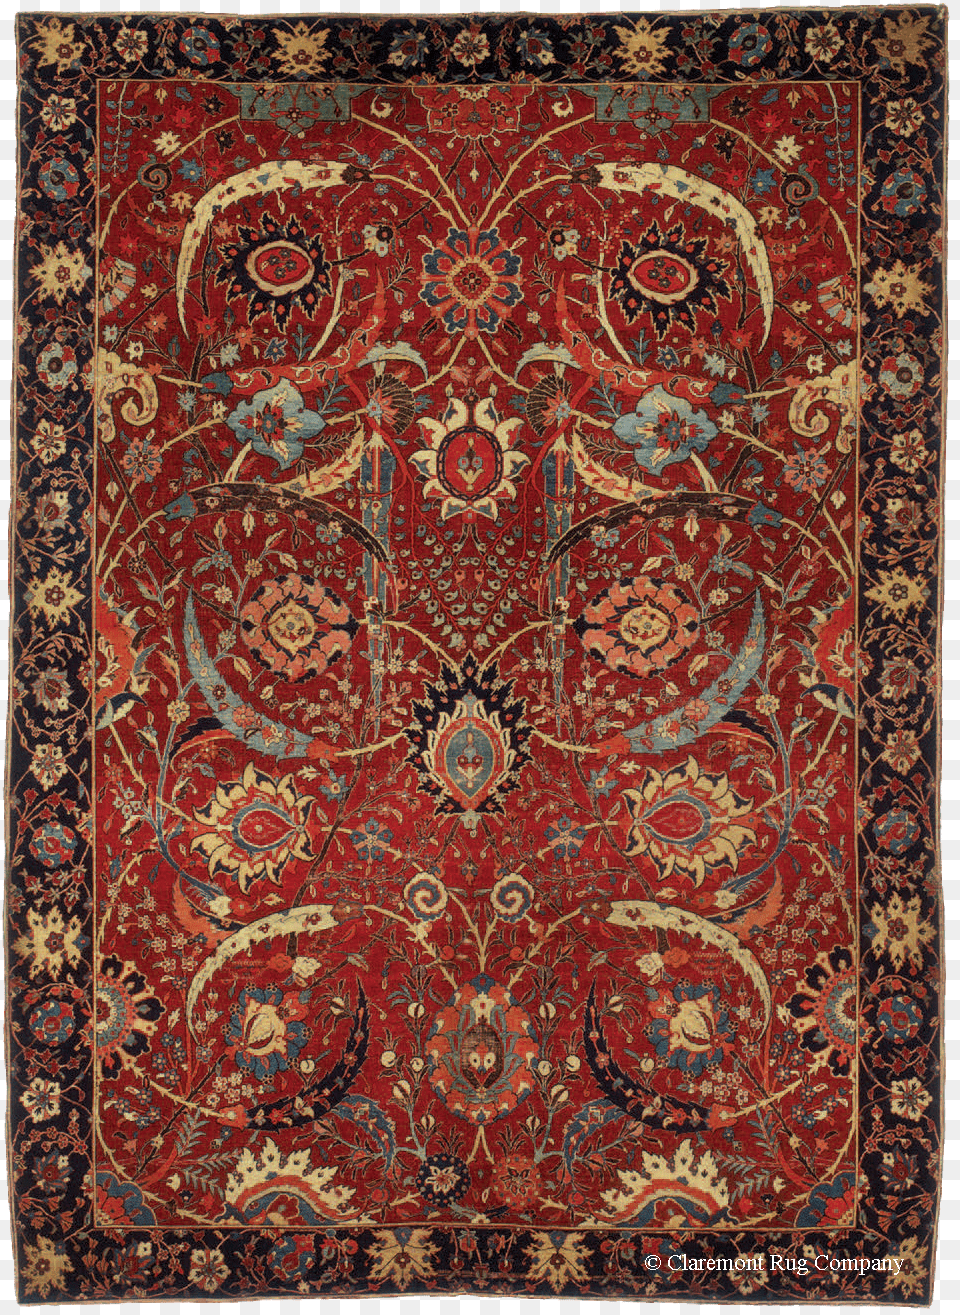 Carpet, Home Decor, Rug, Accessories, Art Free Png